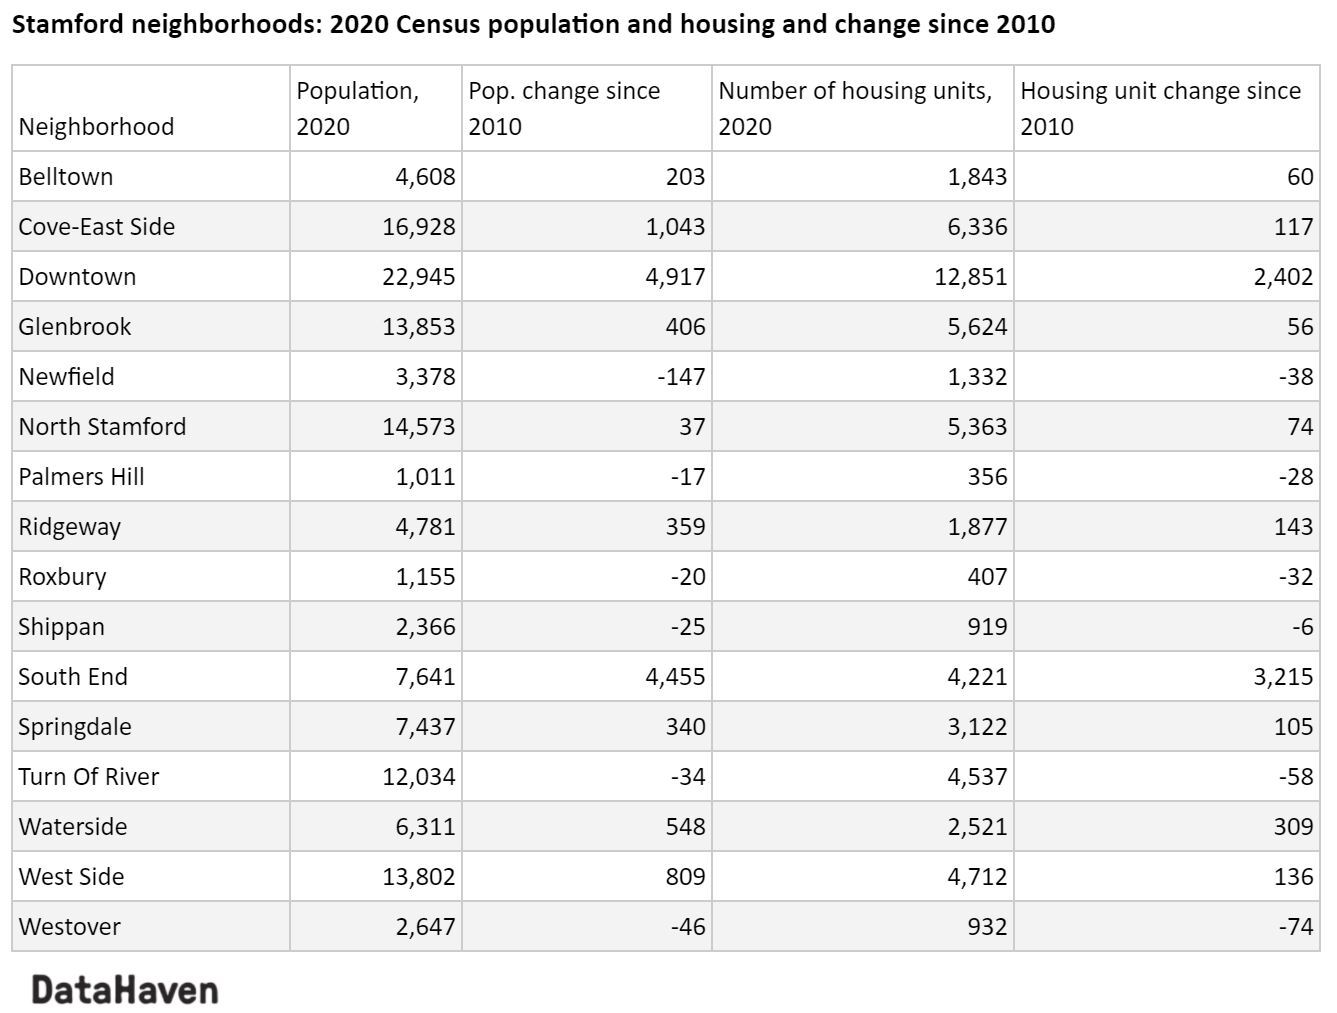 Changes in Stamford neighborhoods 2010 to 2020 census table